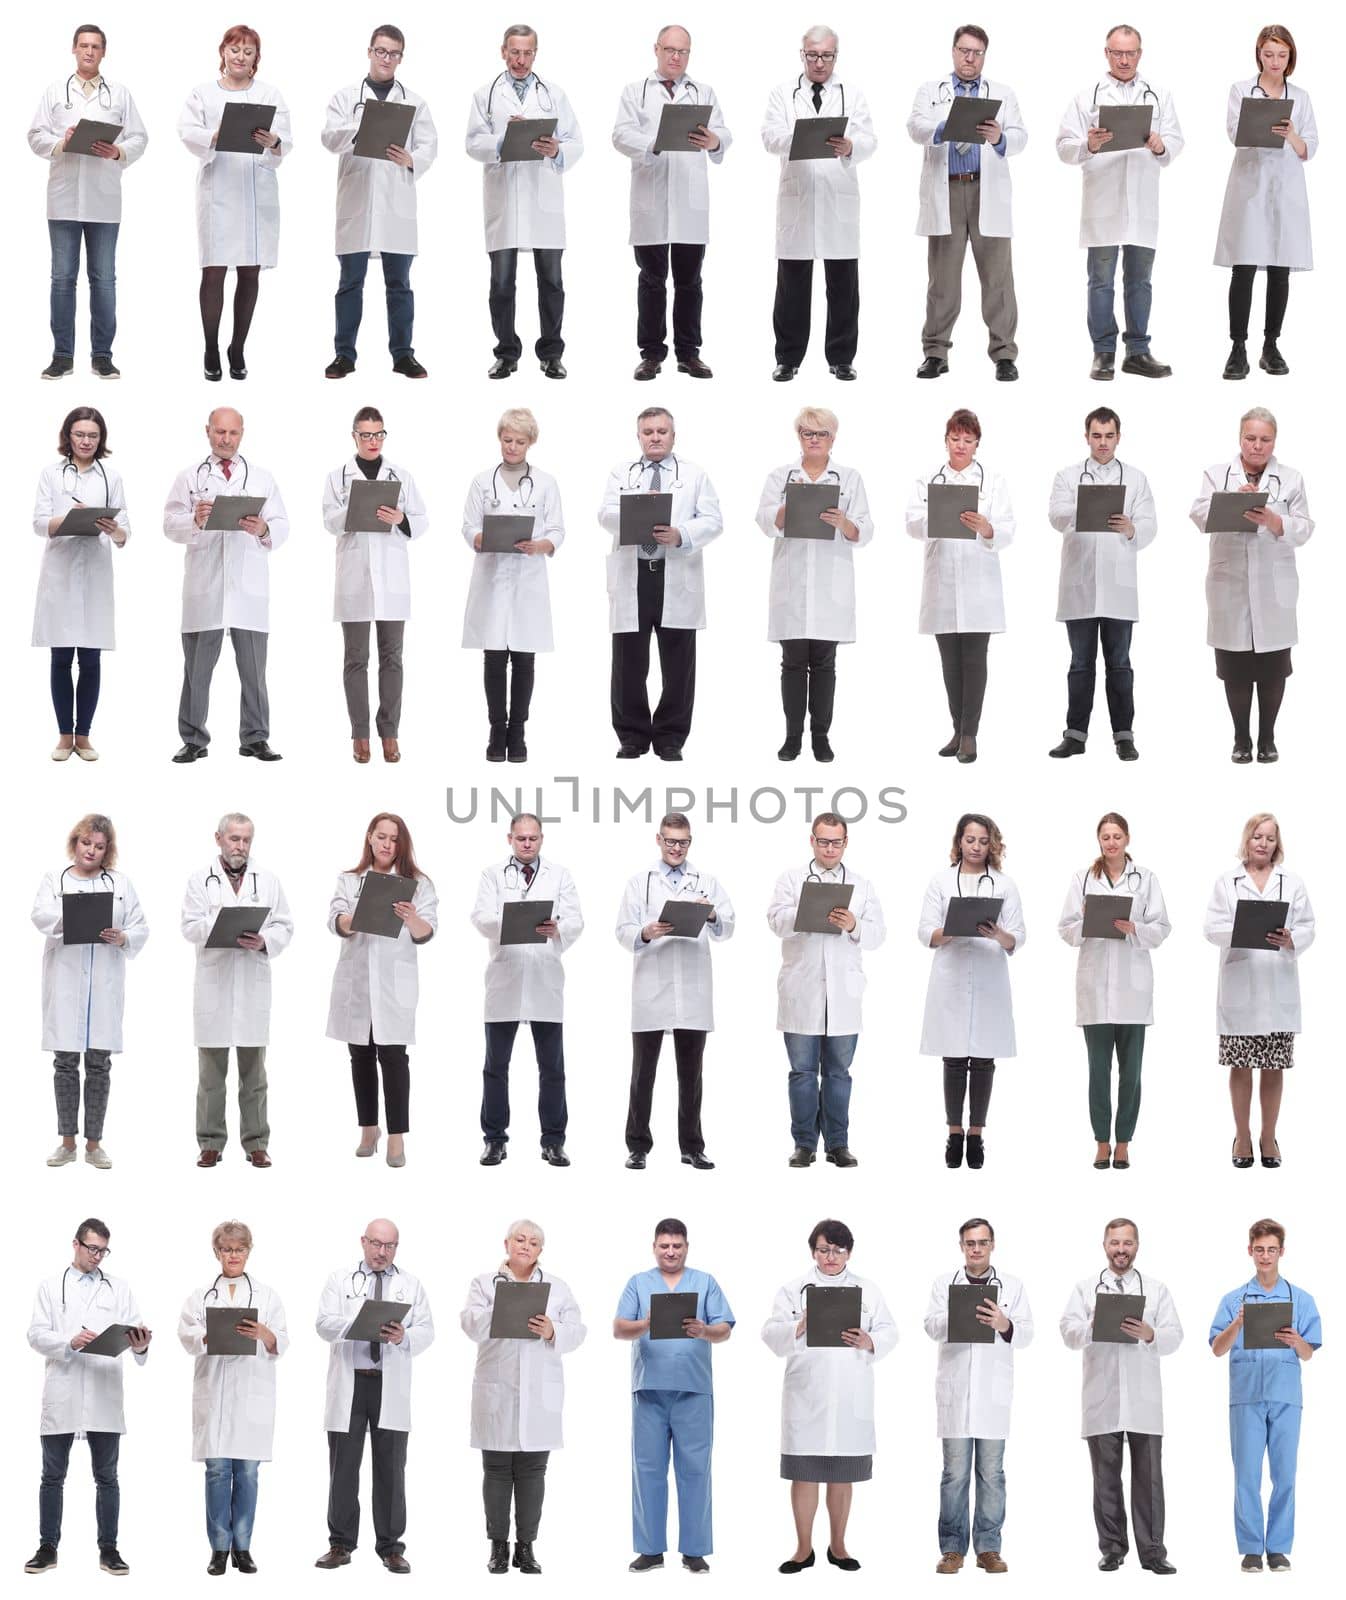 full length group of doctors with notepad isolated on white background